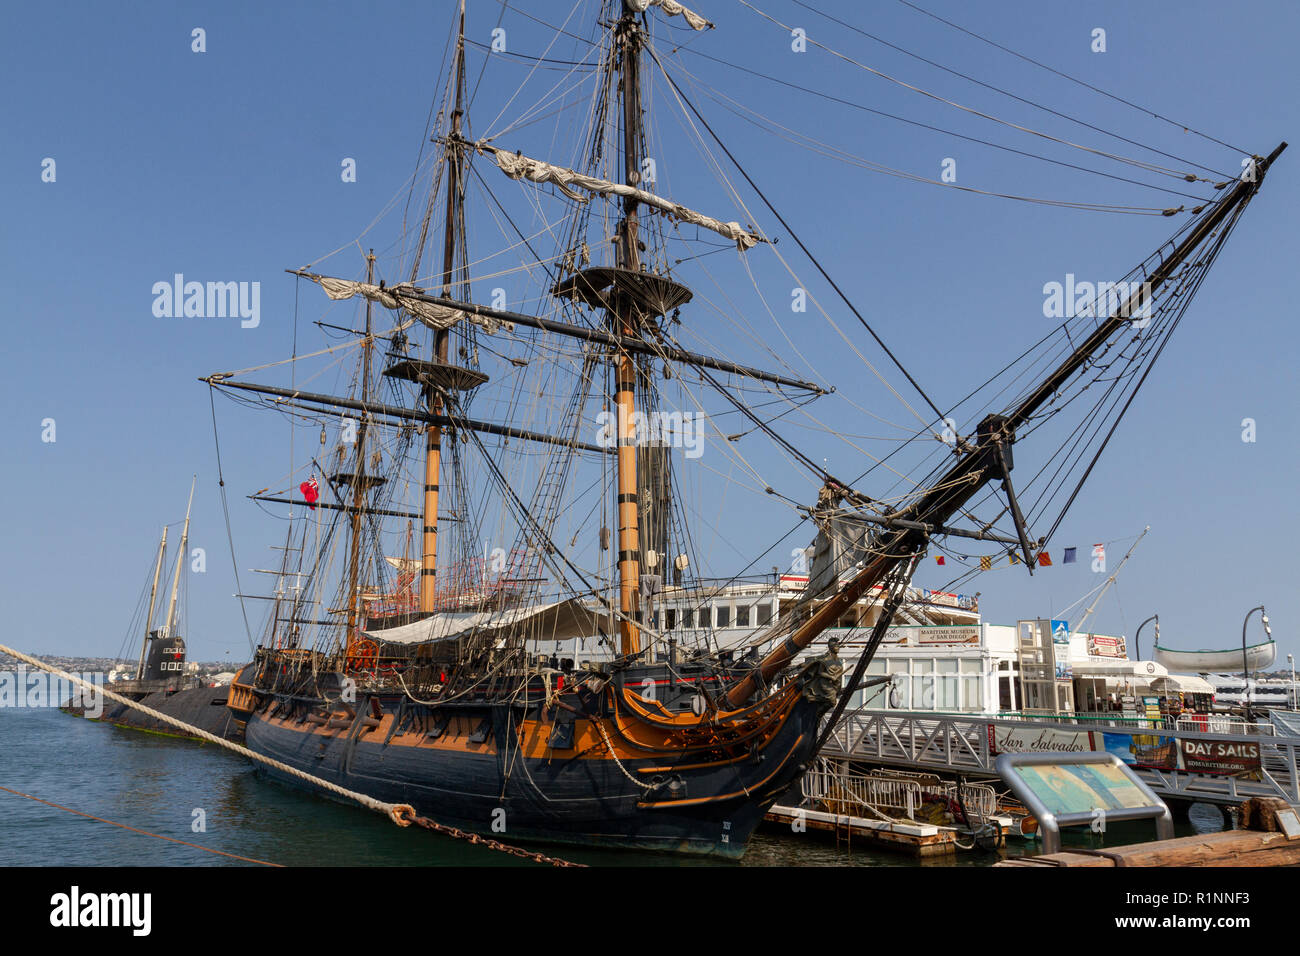 The "HMS" Surprise replica tall ship on the waterfront, San Diego Bay, San  Diego, California, United States Stock Photo - Alamy